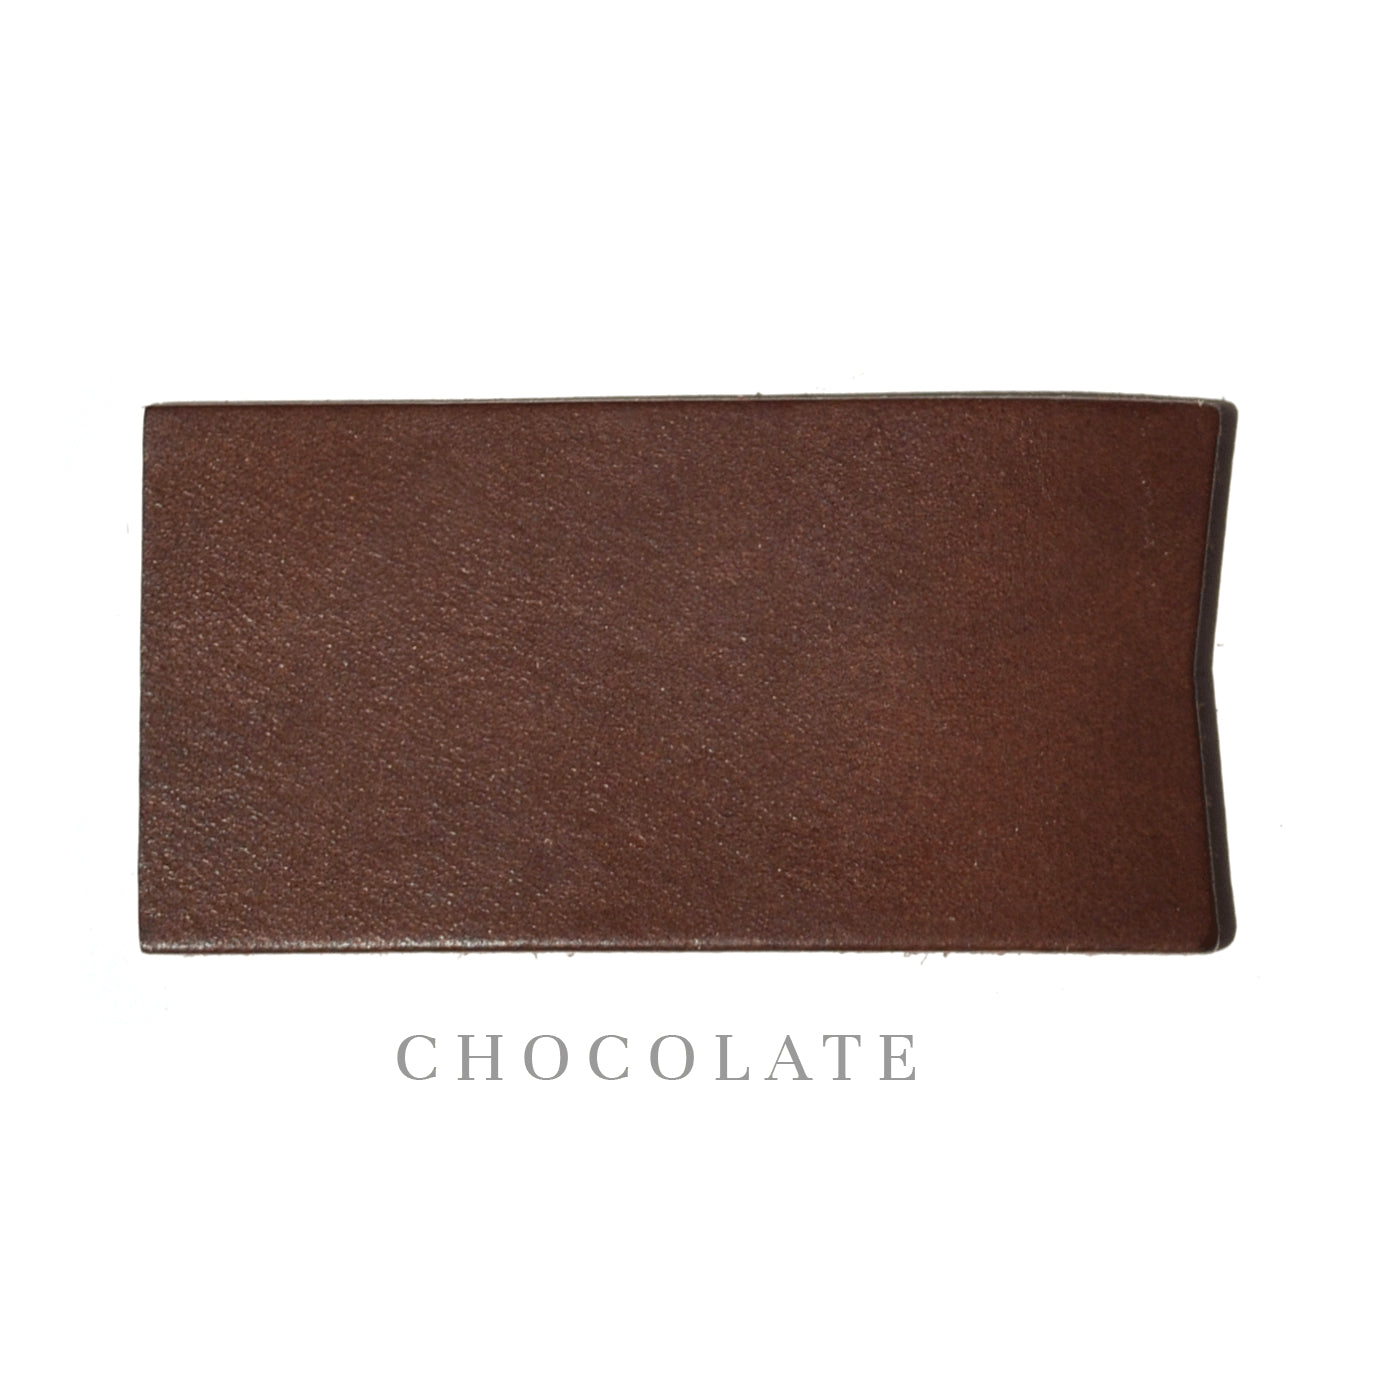 A rectangular-like swatch of chocolate color leather. 